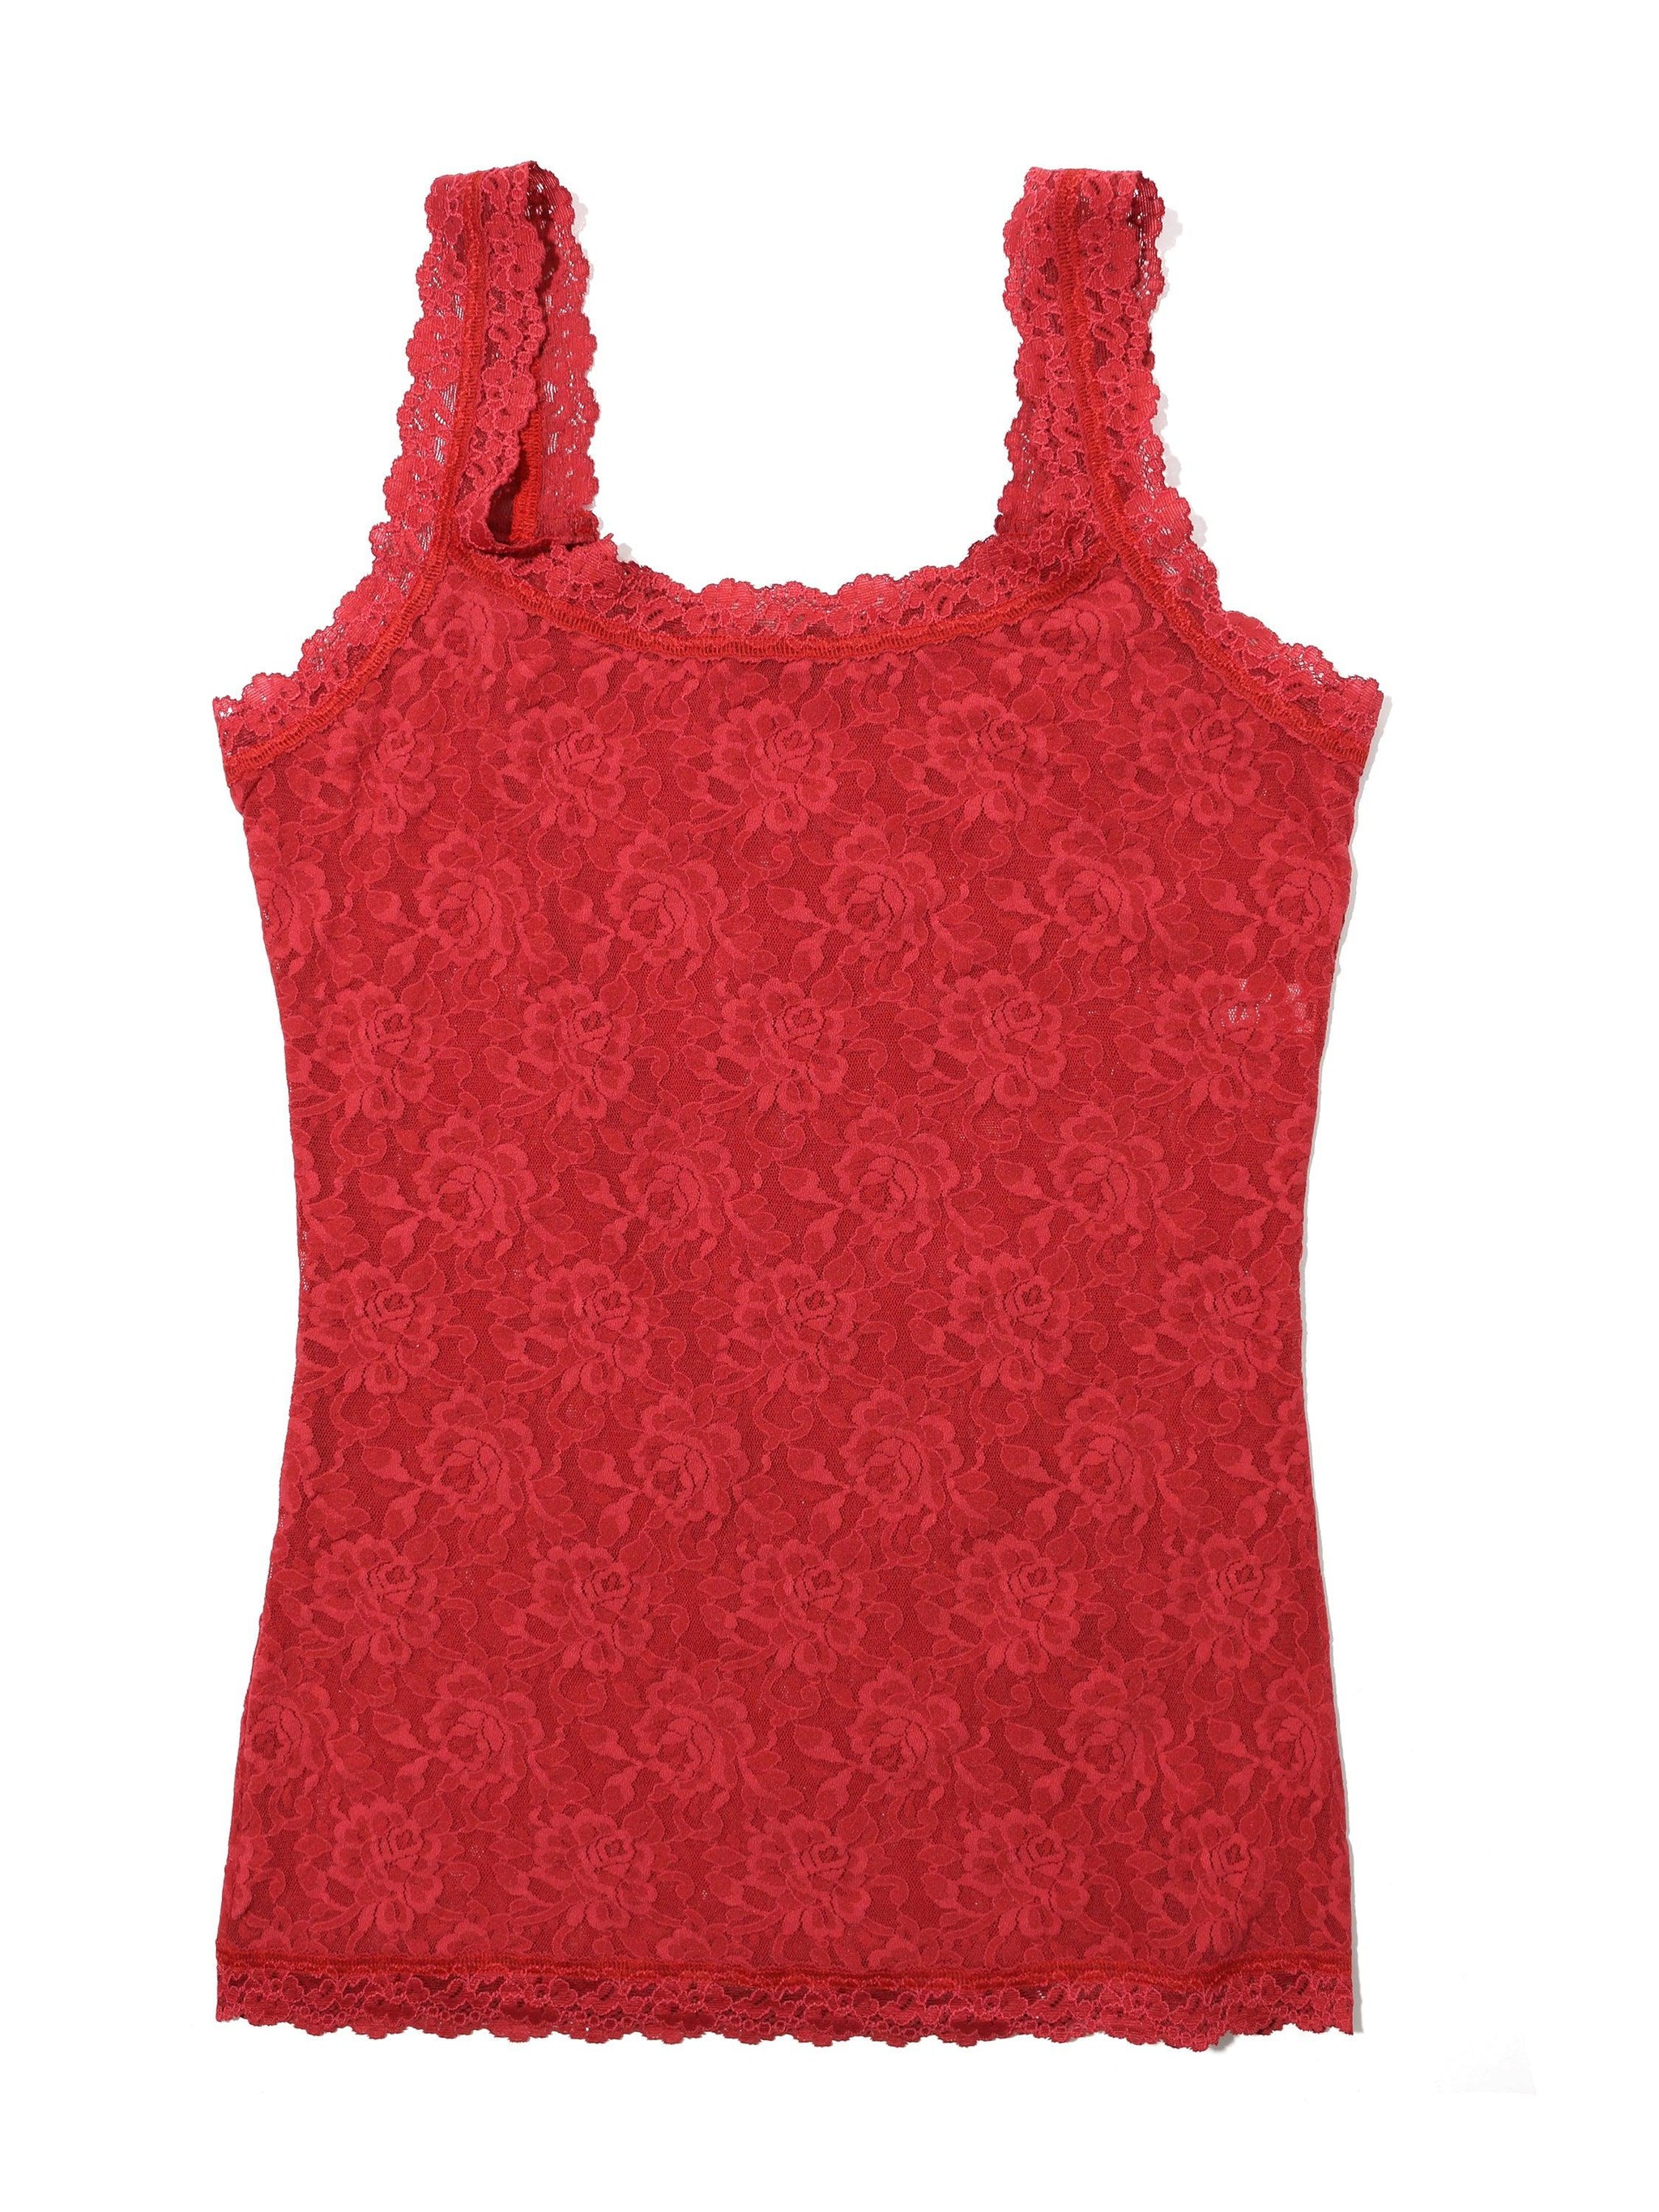 Signature Lace Classic Cami Burnt Sienna Red Sale